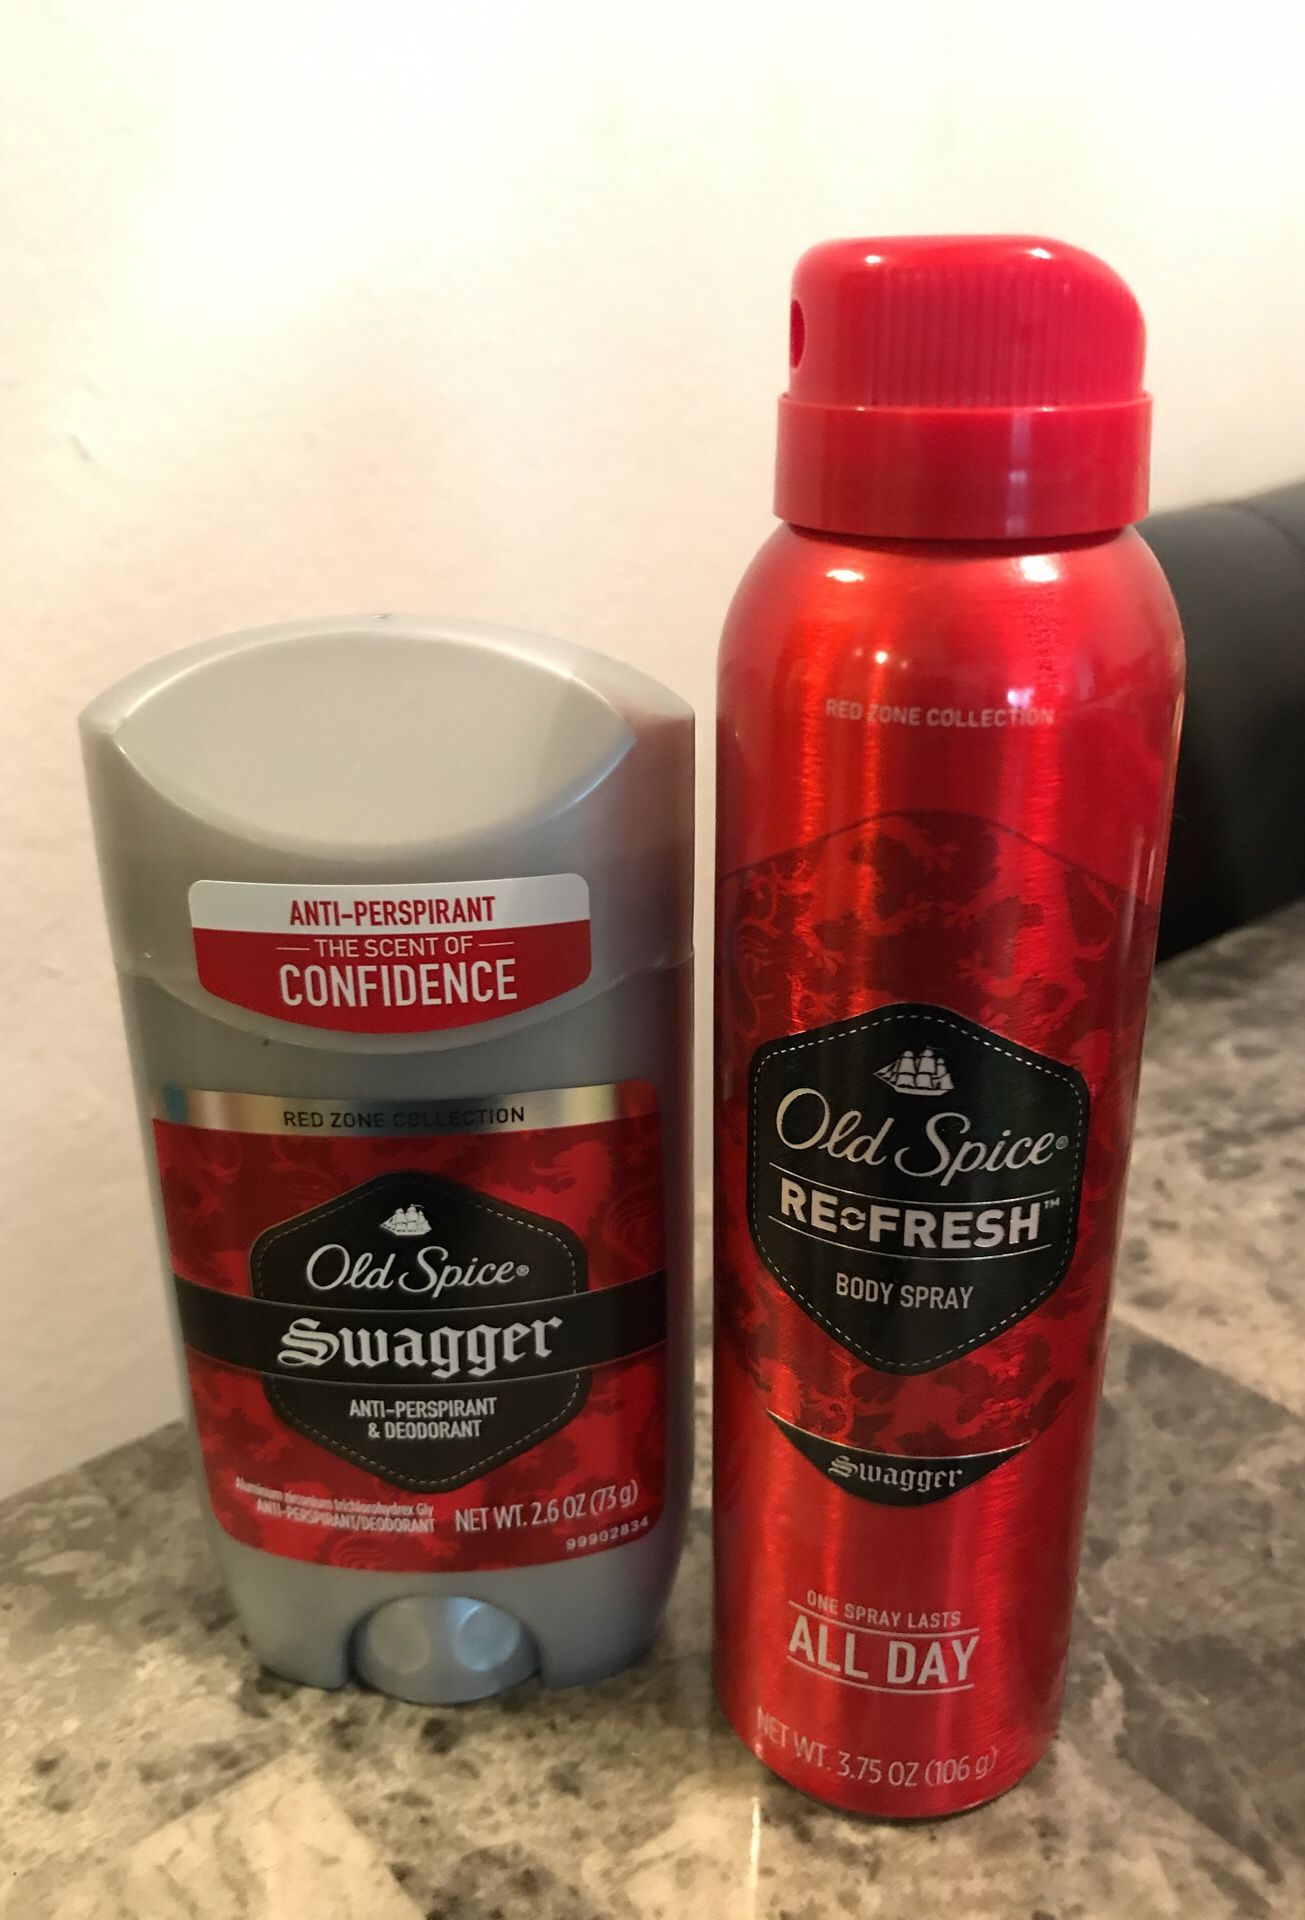 Old spice product